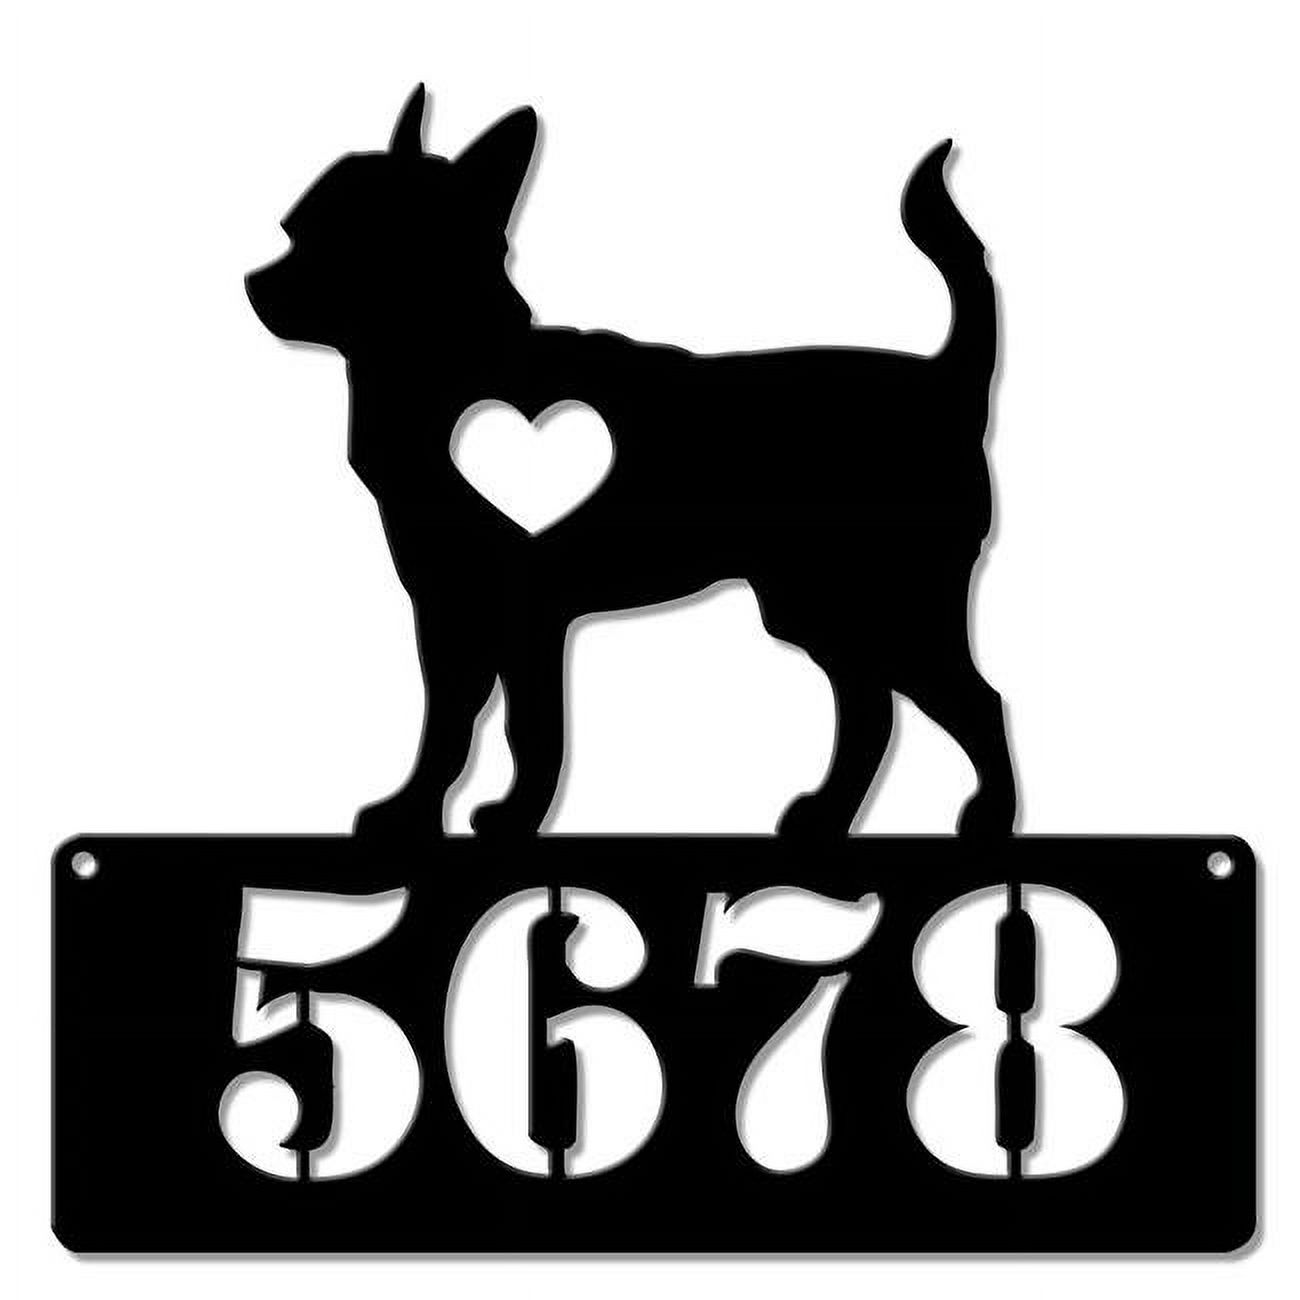 Pasttime Signs PTSD022 15 x 15 in. Chihuahua Lover Address Personalized Vintage Metal Sign - image 1 of 1